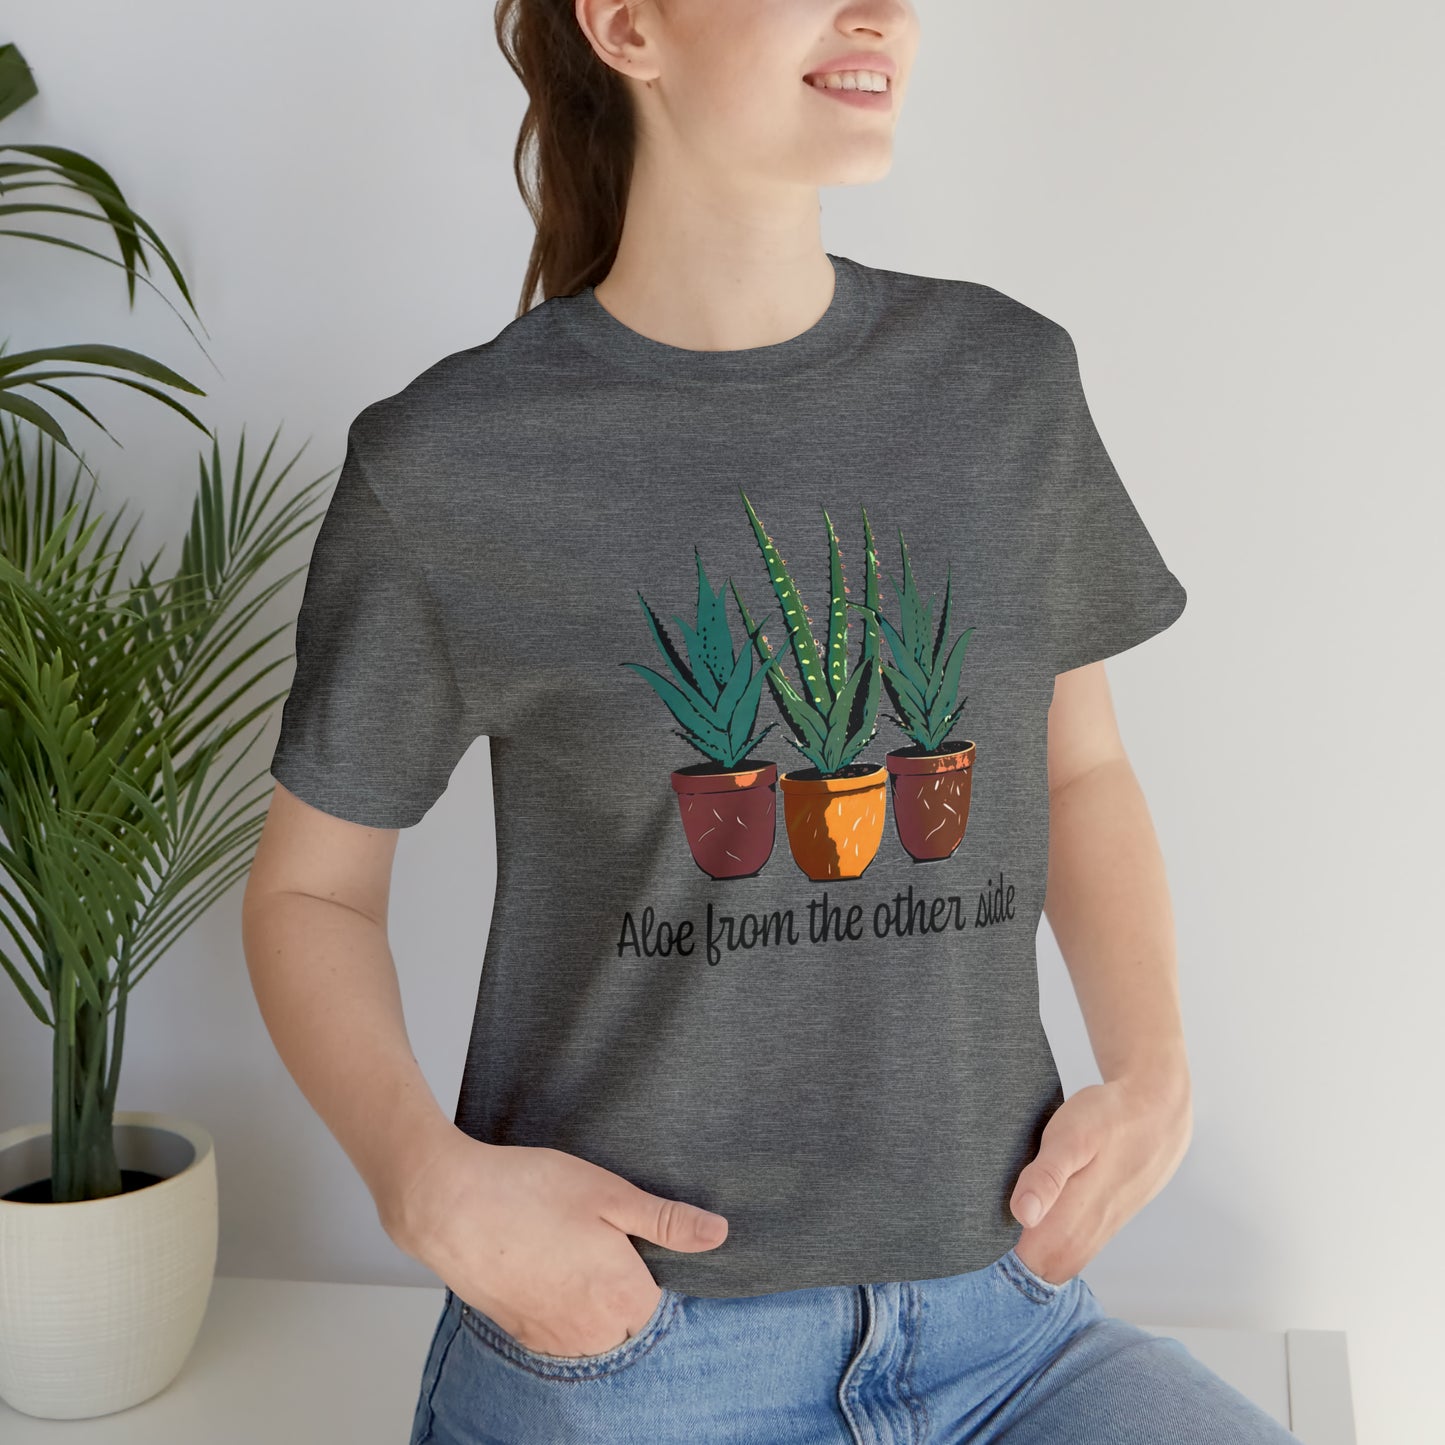 "Aloe From the Other Side" Unisex Jersey Short Sleeve Tee